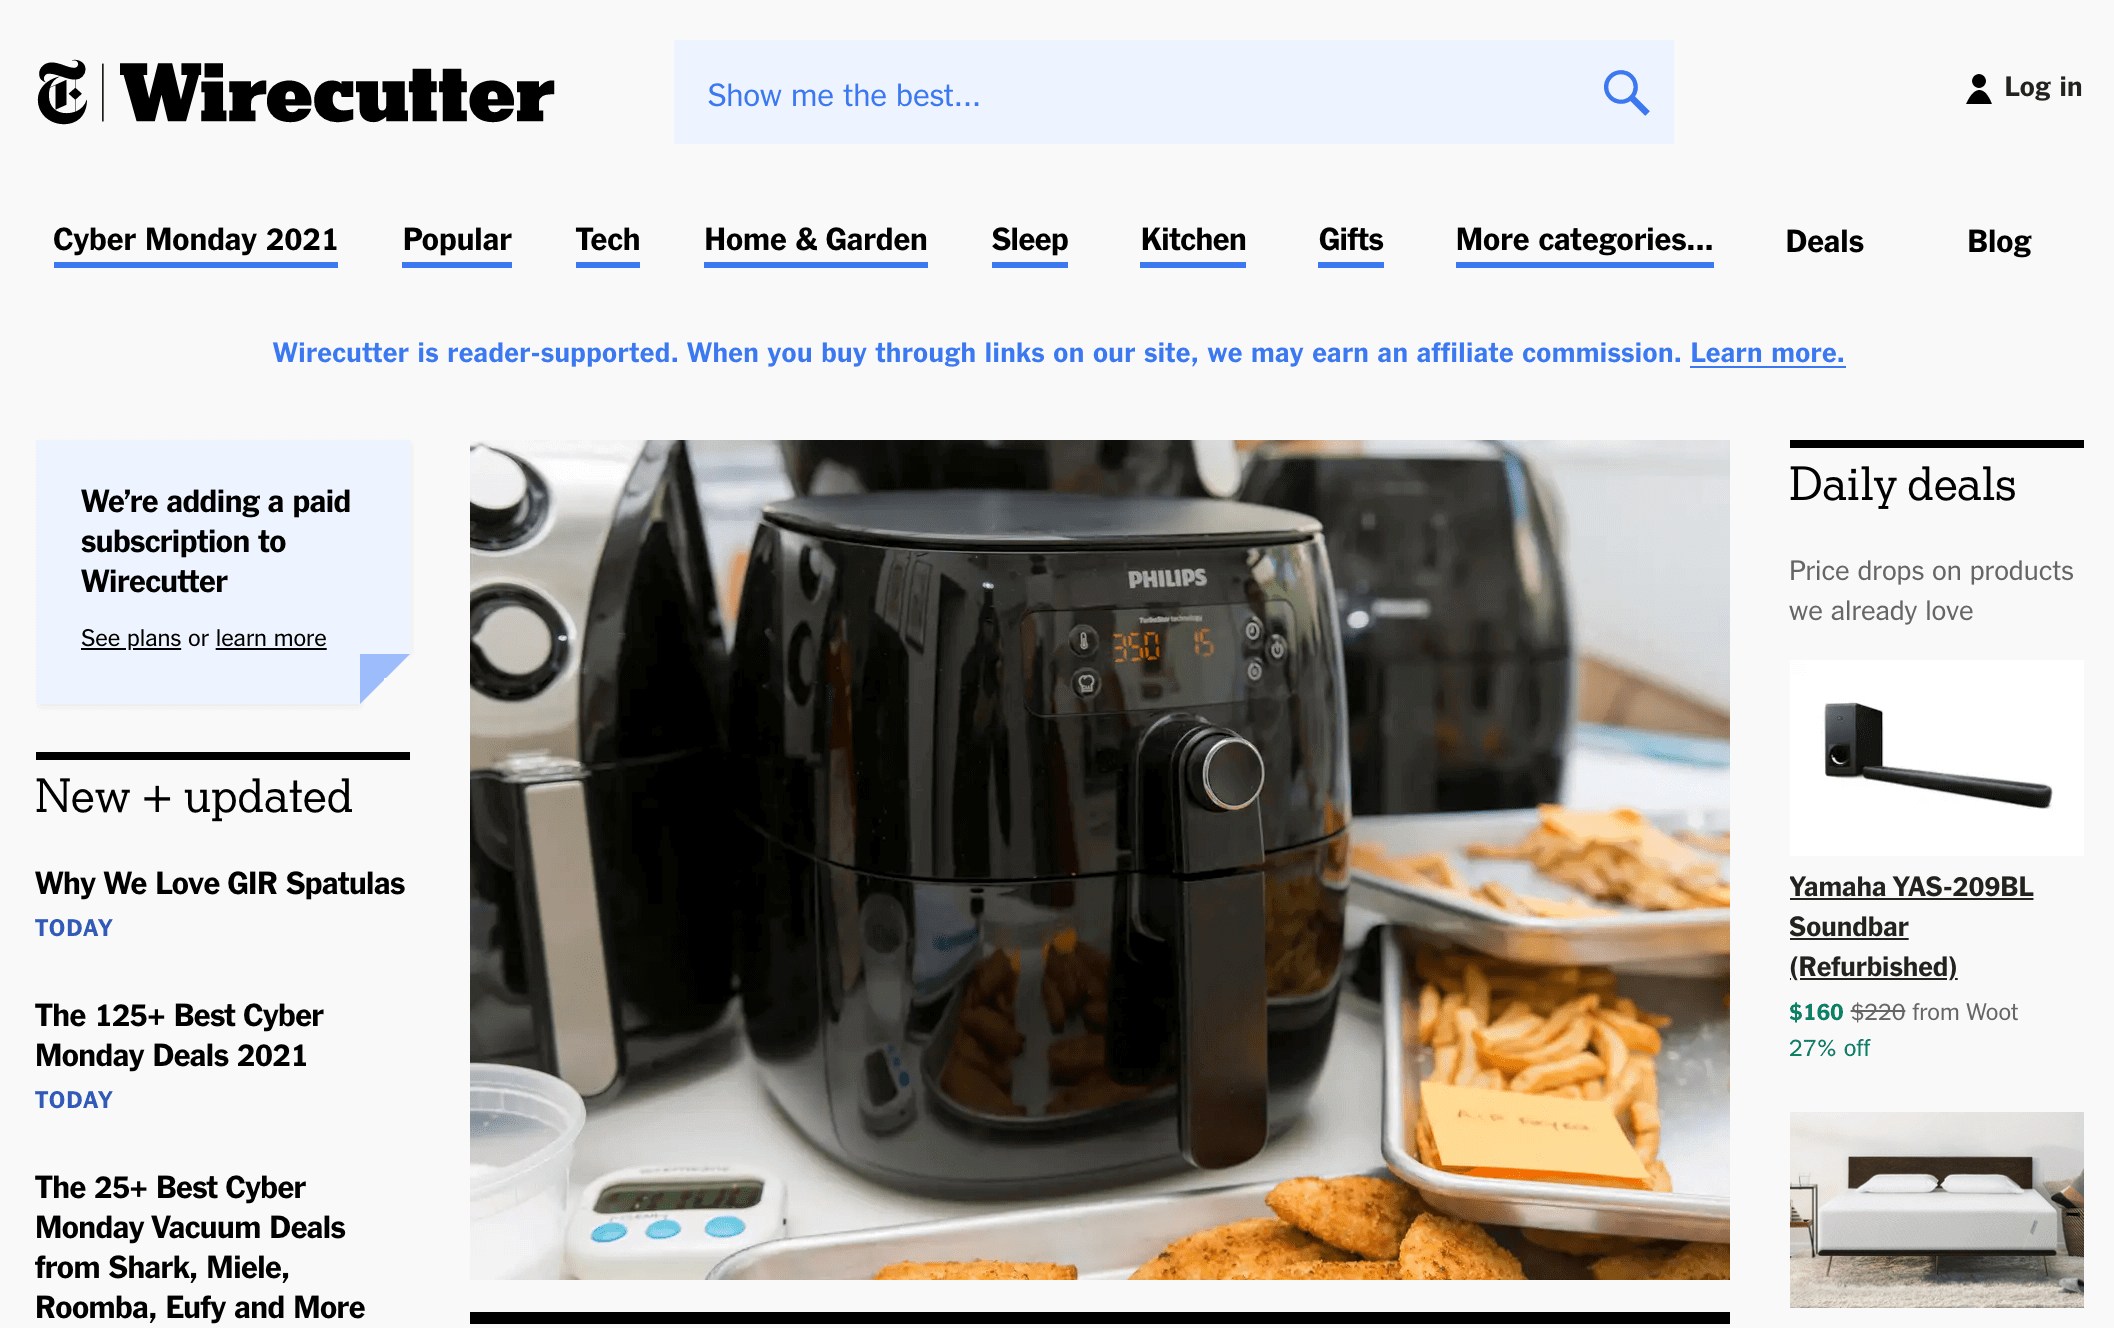 WireCutter successfully implemented affiliate marketing